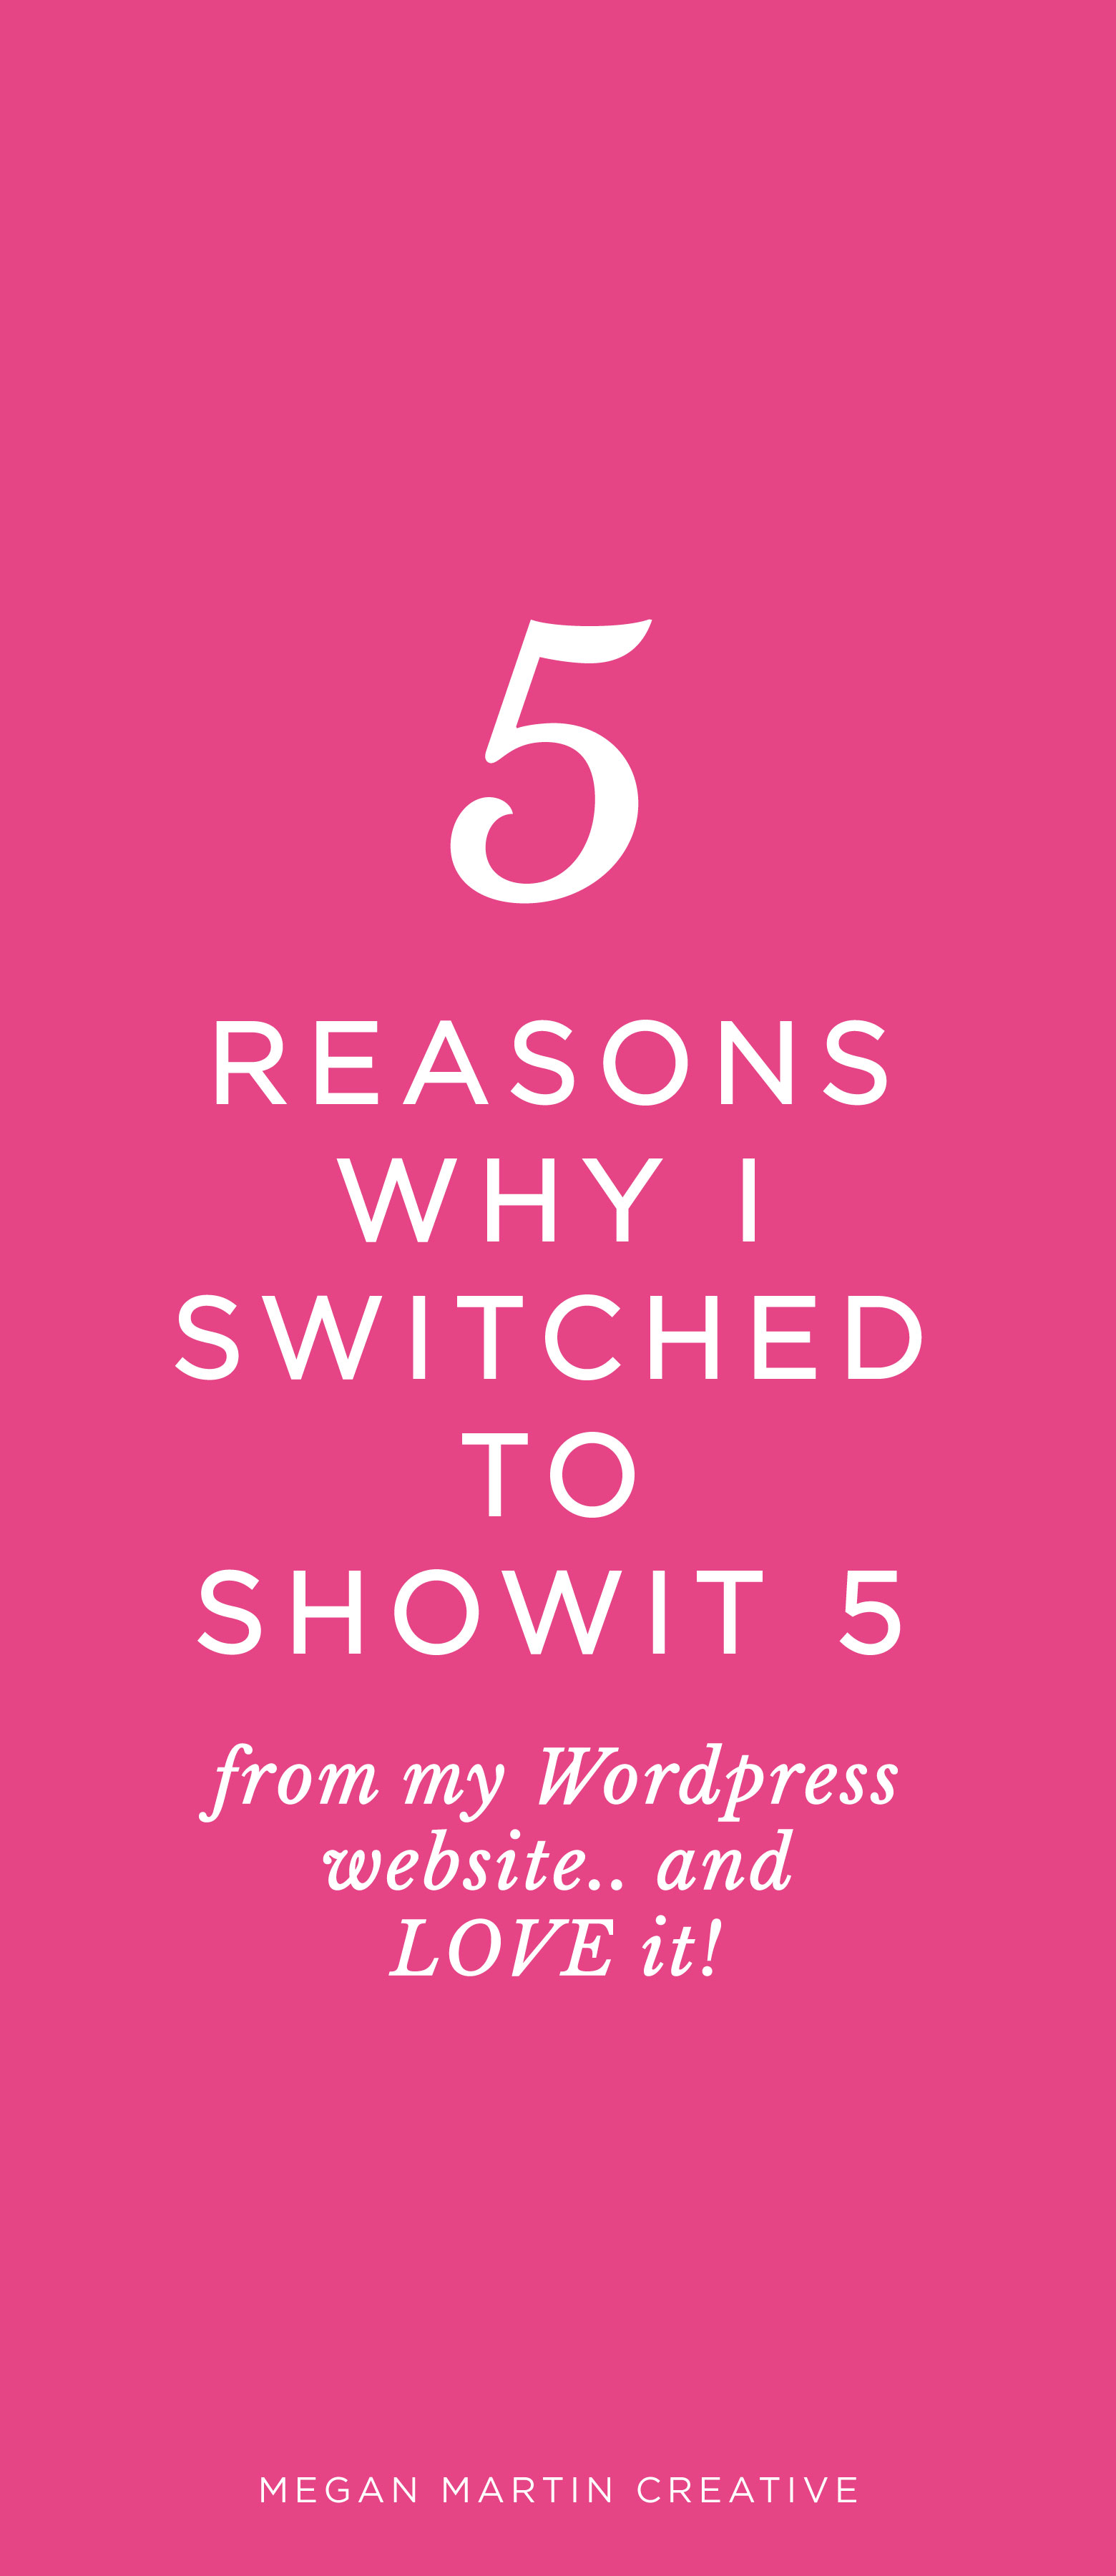 5 reasons why I switched from WordPress to Showit 5 on Megan Martin Creative, Creative Website, Website Design, Website Builder, Showiteer